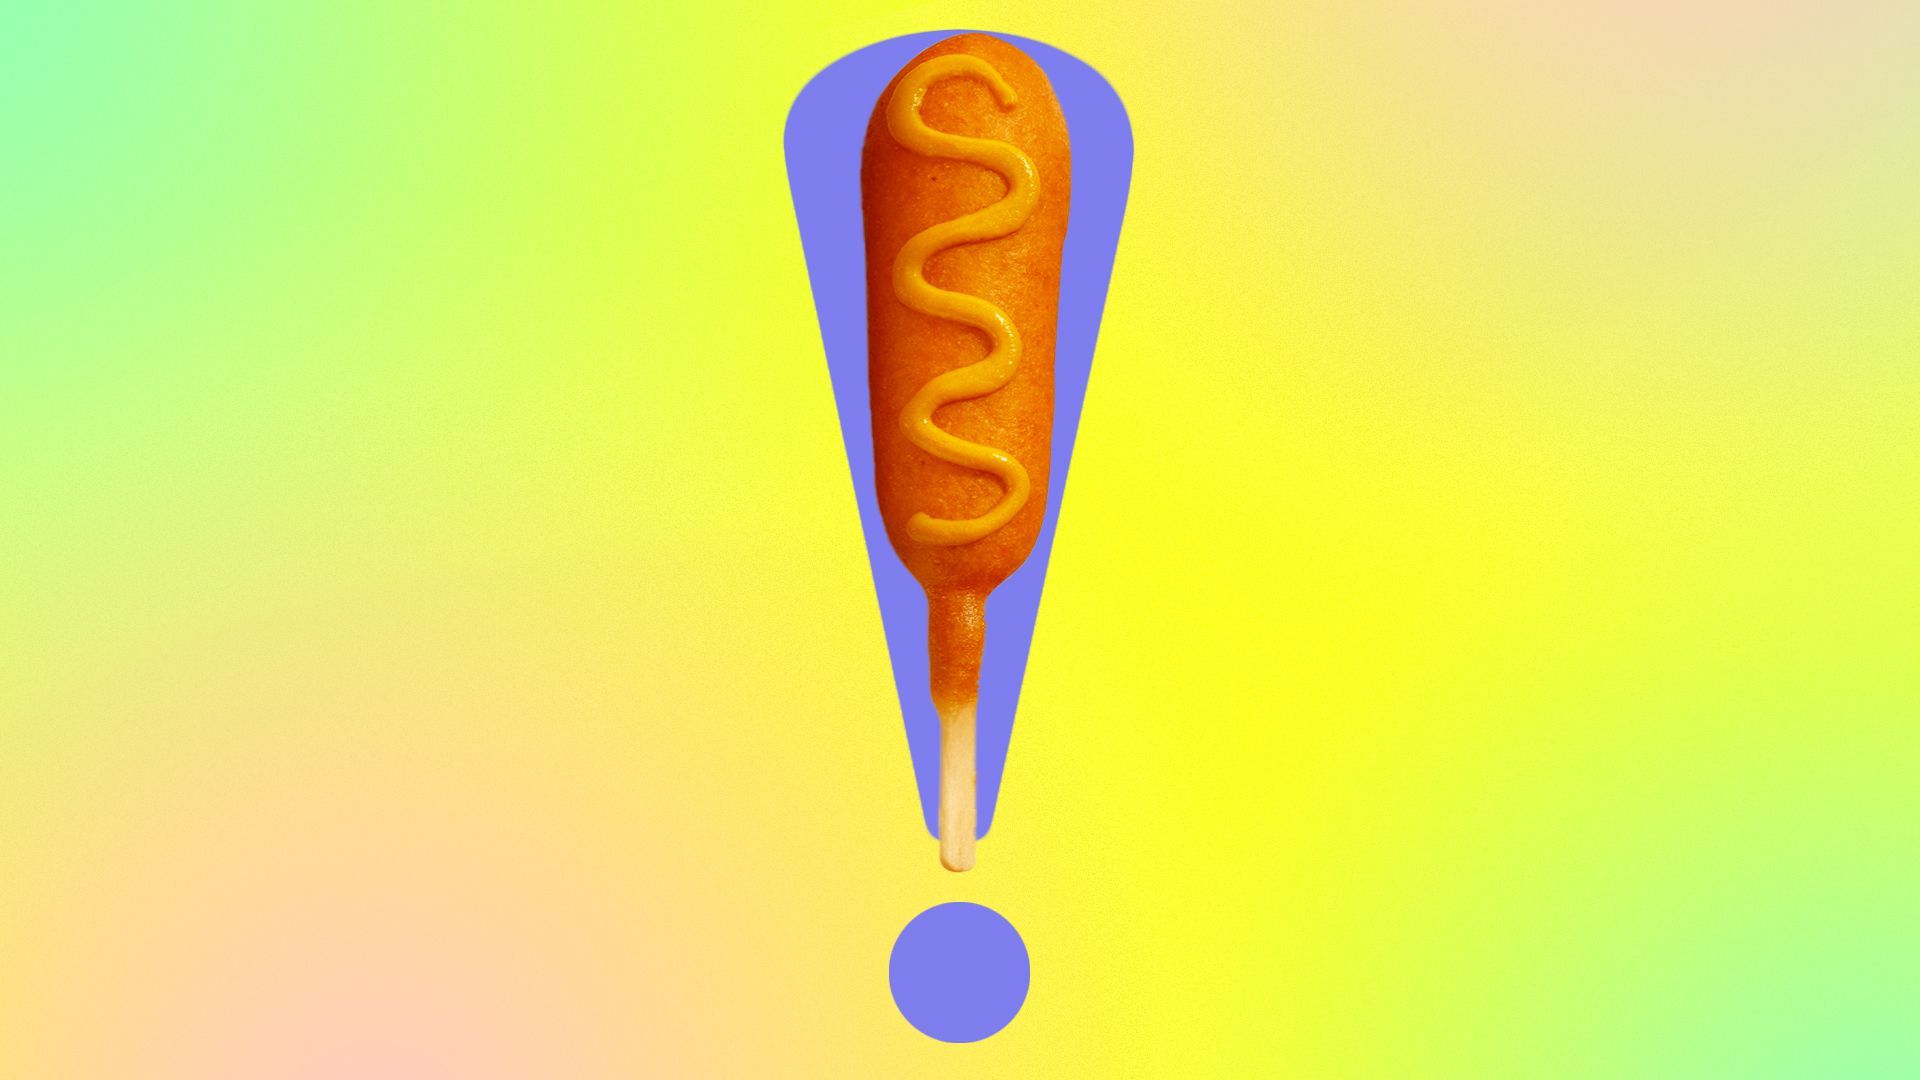 Illustration of a corn dog laid over an exclamation point